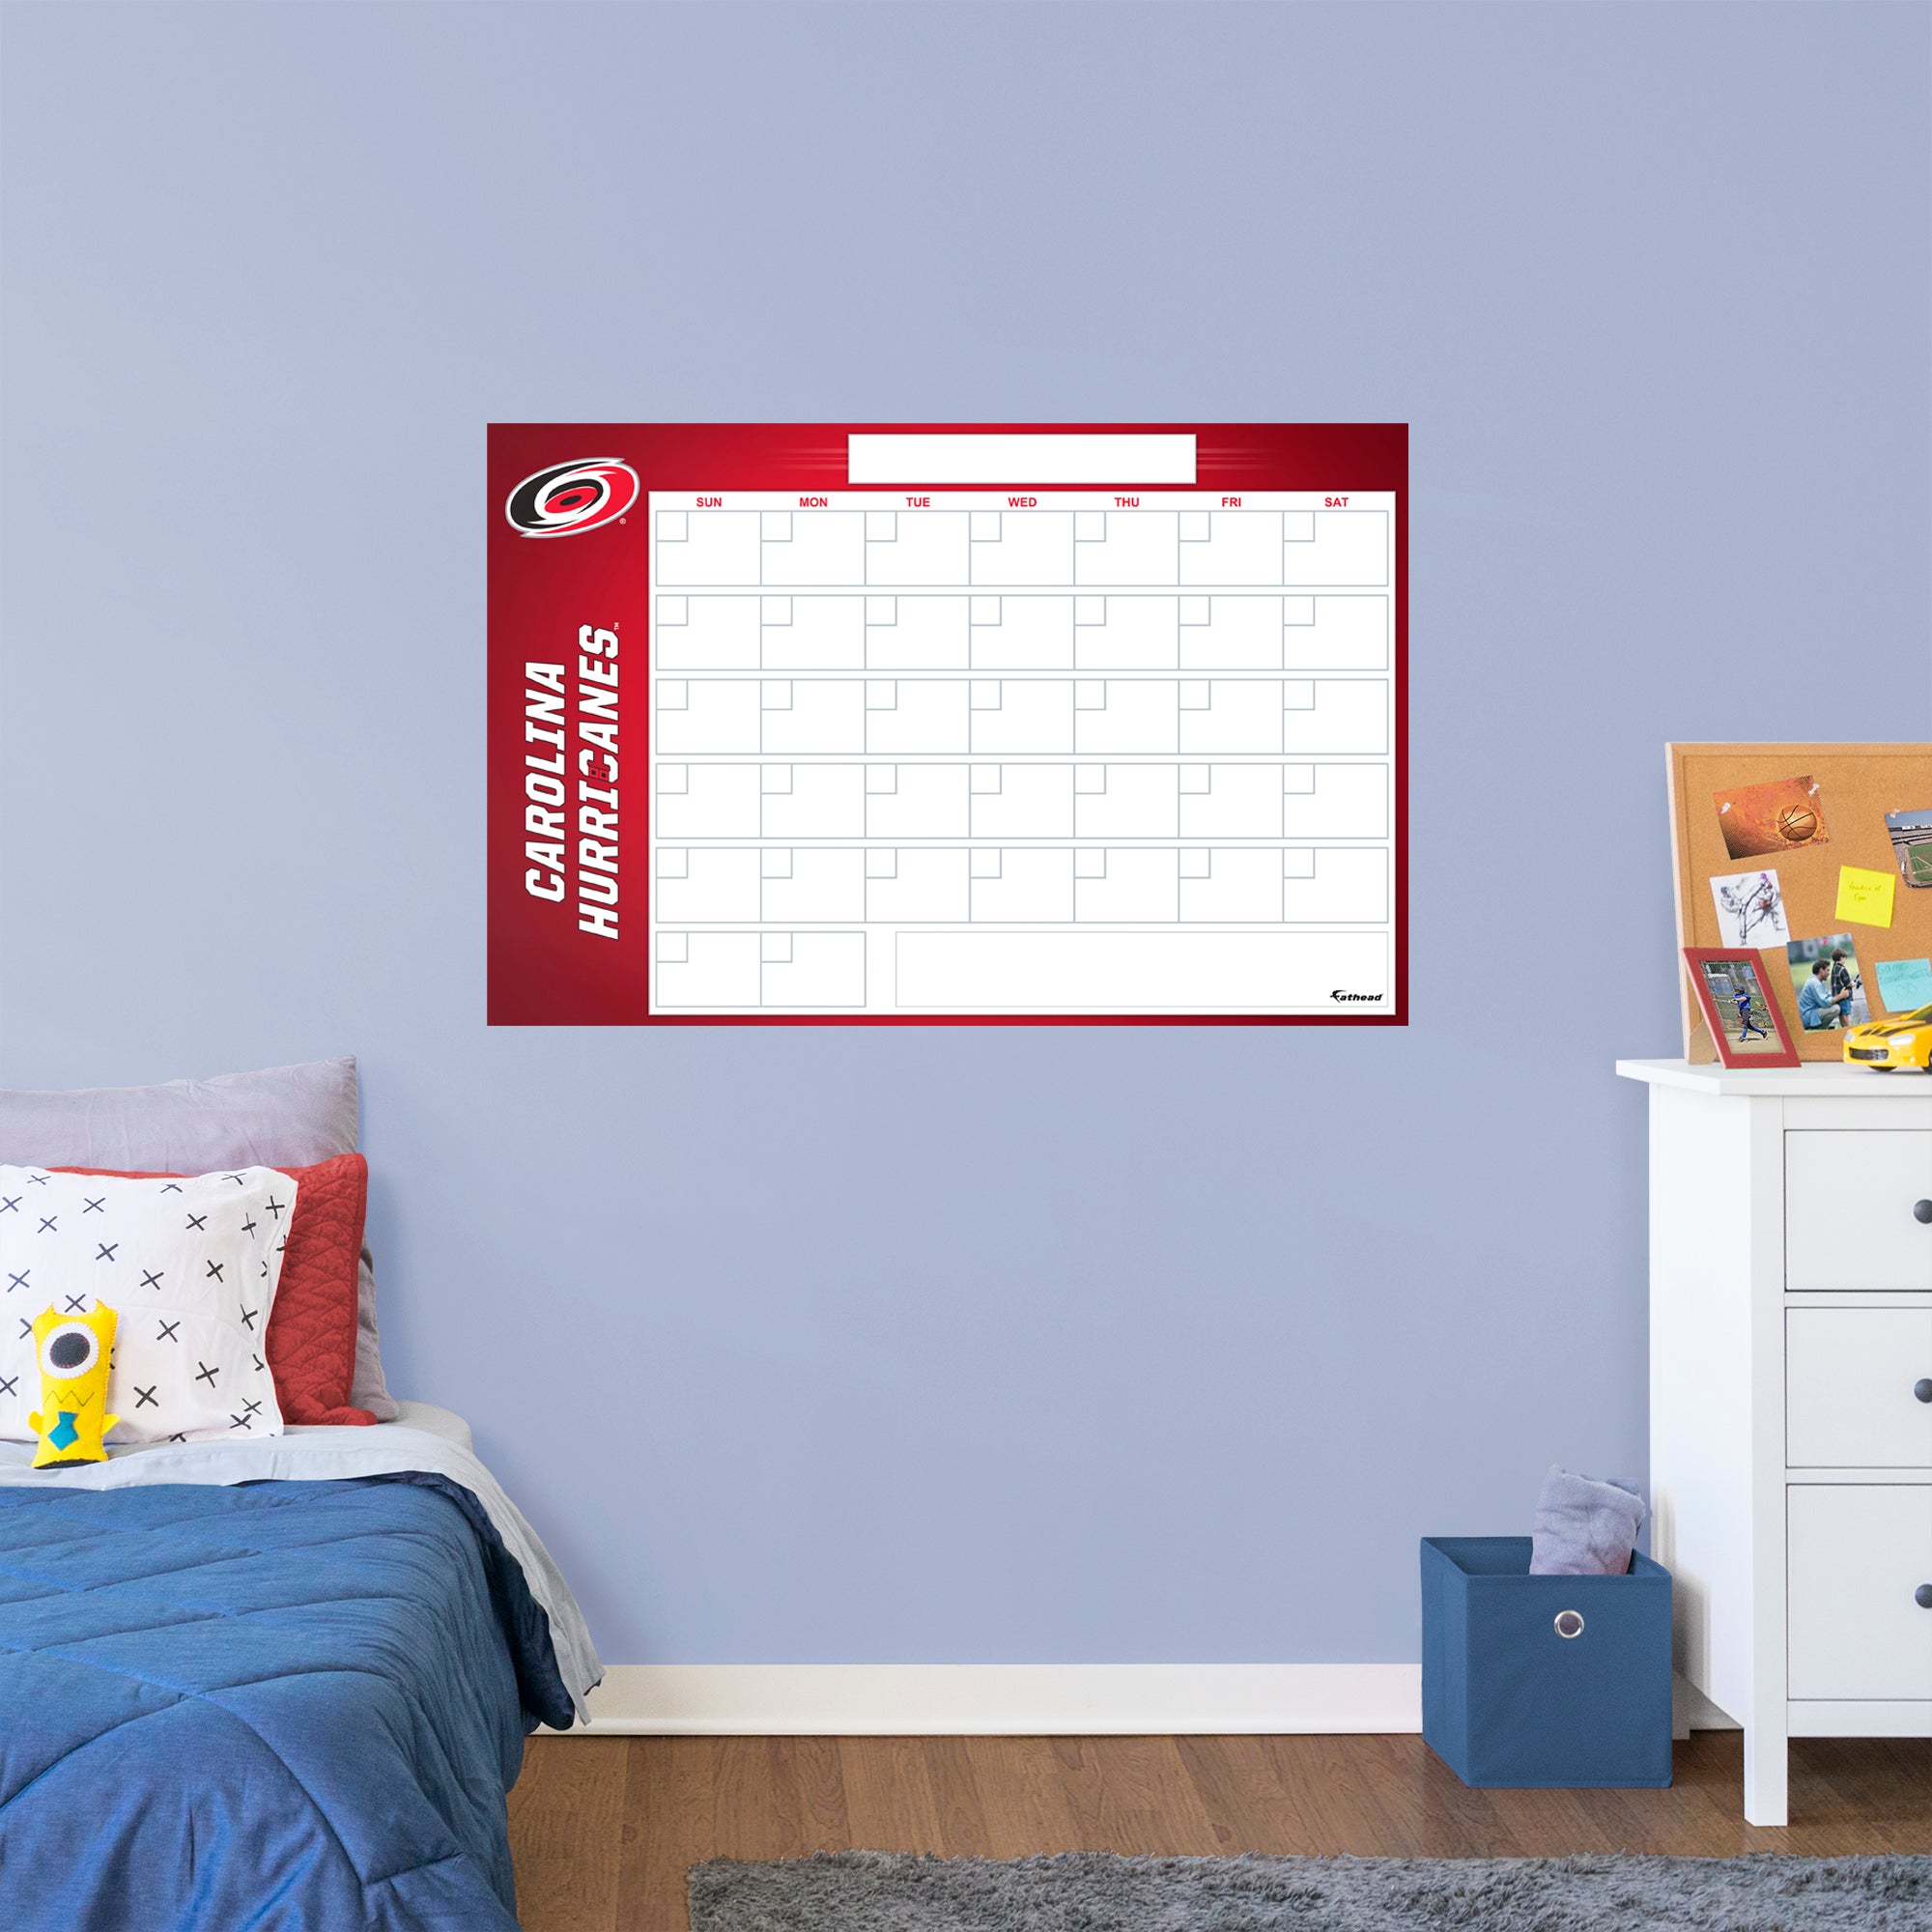 Carolina Hurricanes Dry Erase Calendar - Officially Licensed NHL Removable Wall Decal Giant Decal (57"W x 34"H) by Fathead | Vin